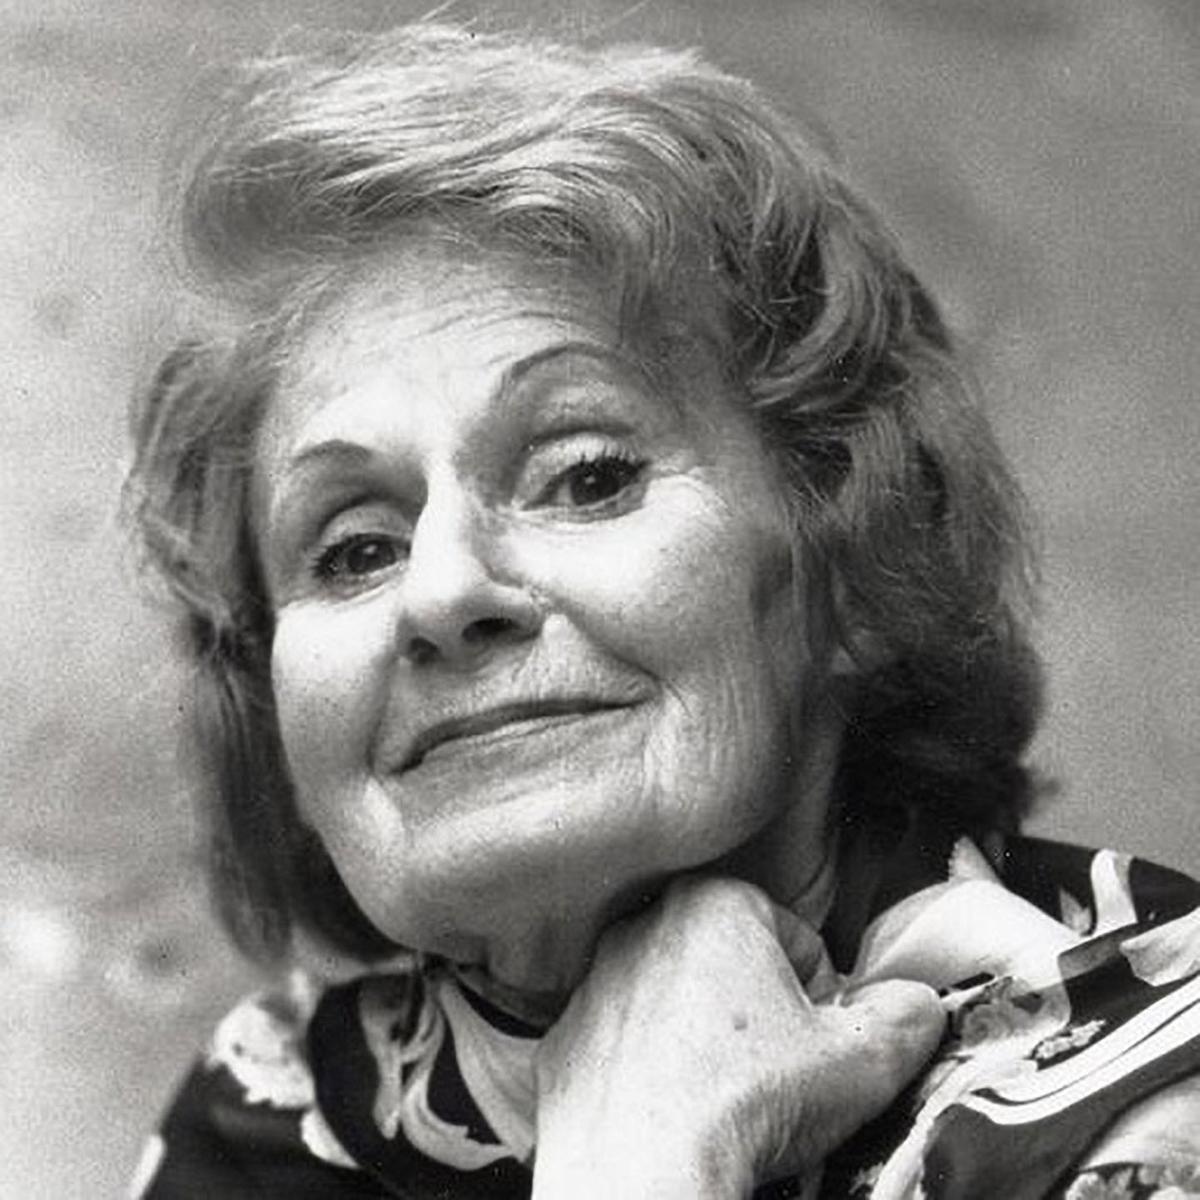 Heda Kovaly is remembered for her journal, “Under a Cruel Star: A Life in Prague 1941–1968.”